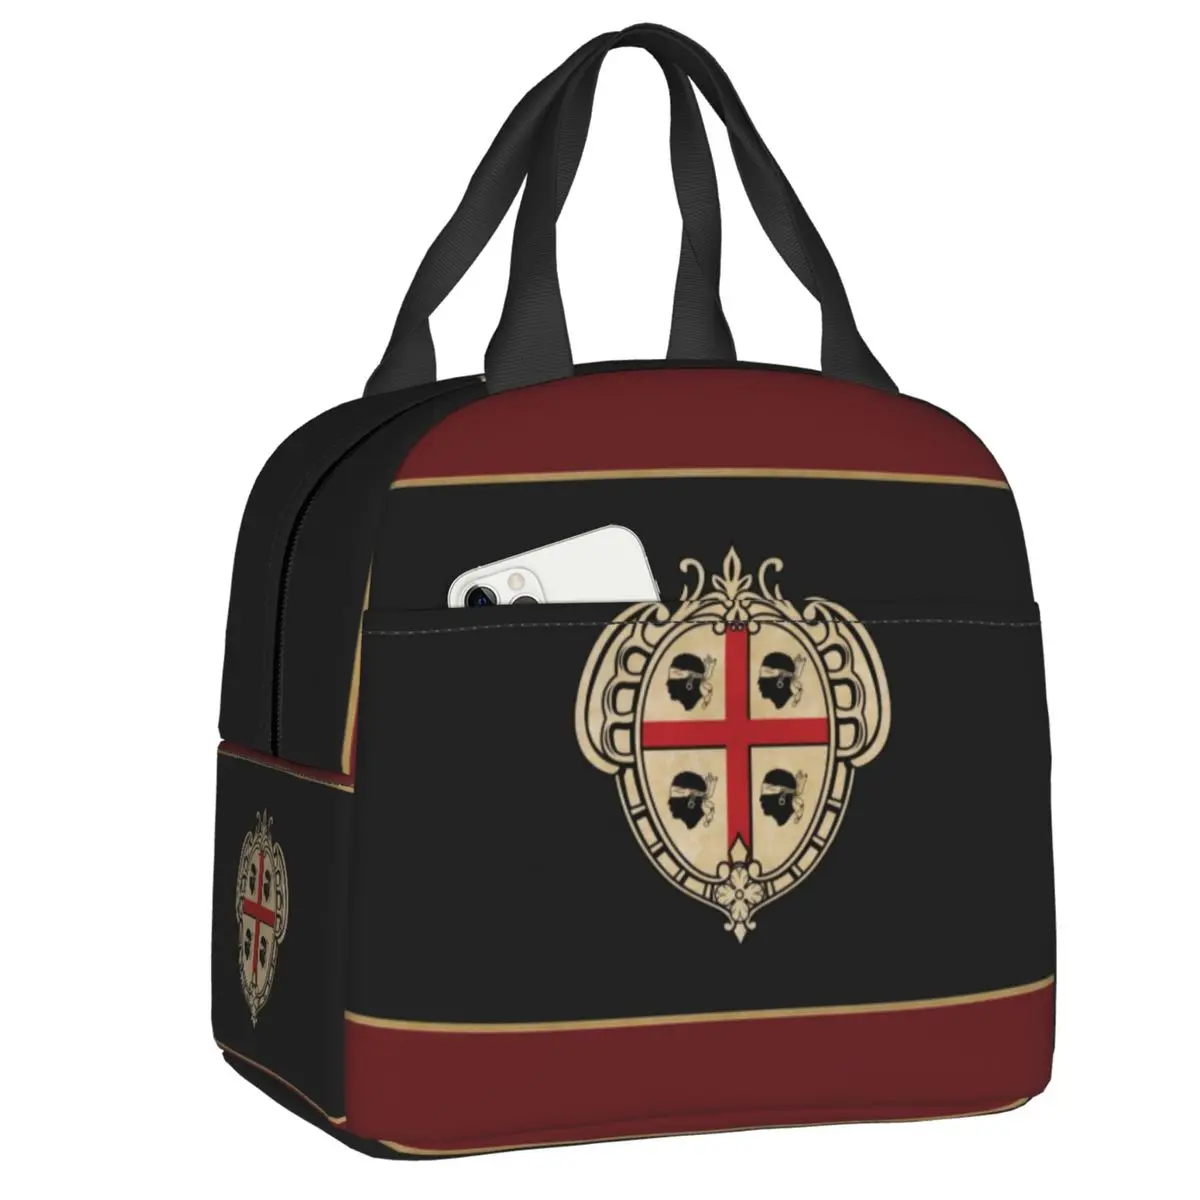 

Sardinia Coat Of Arms Lunch Bag Women Italy Sardegna Flag Resuable Thermal Insulated Lunch Container for School Picnic Food Bags